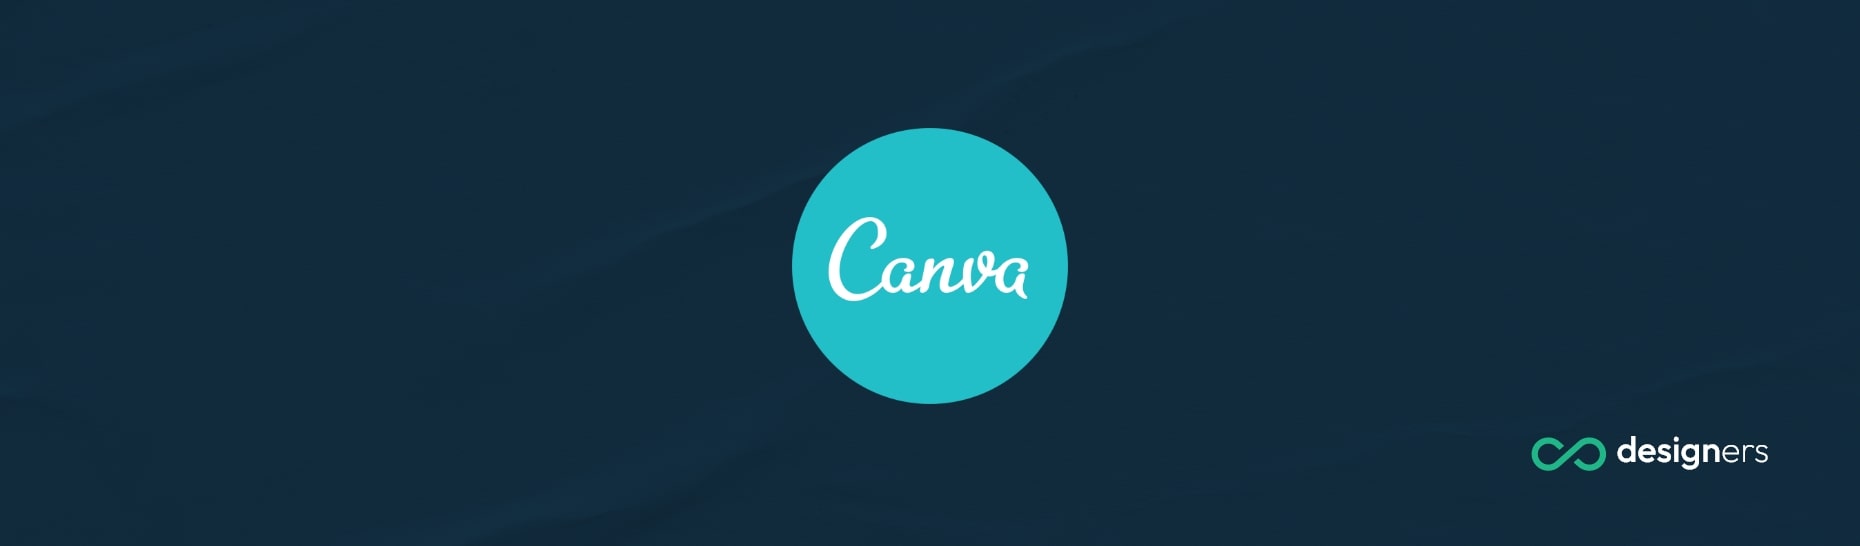 Does Canva Hire Graphic Designers?